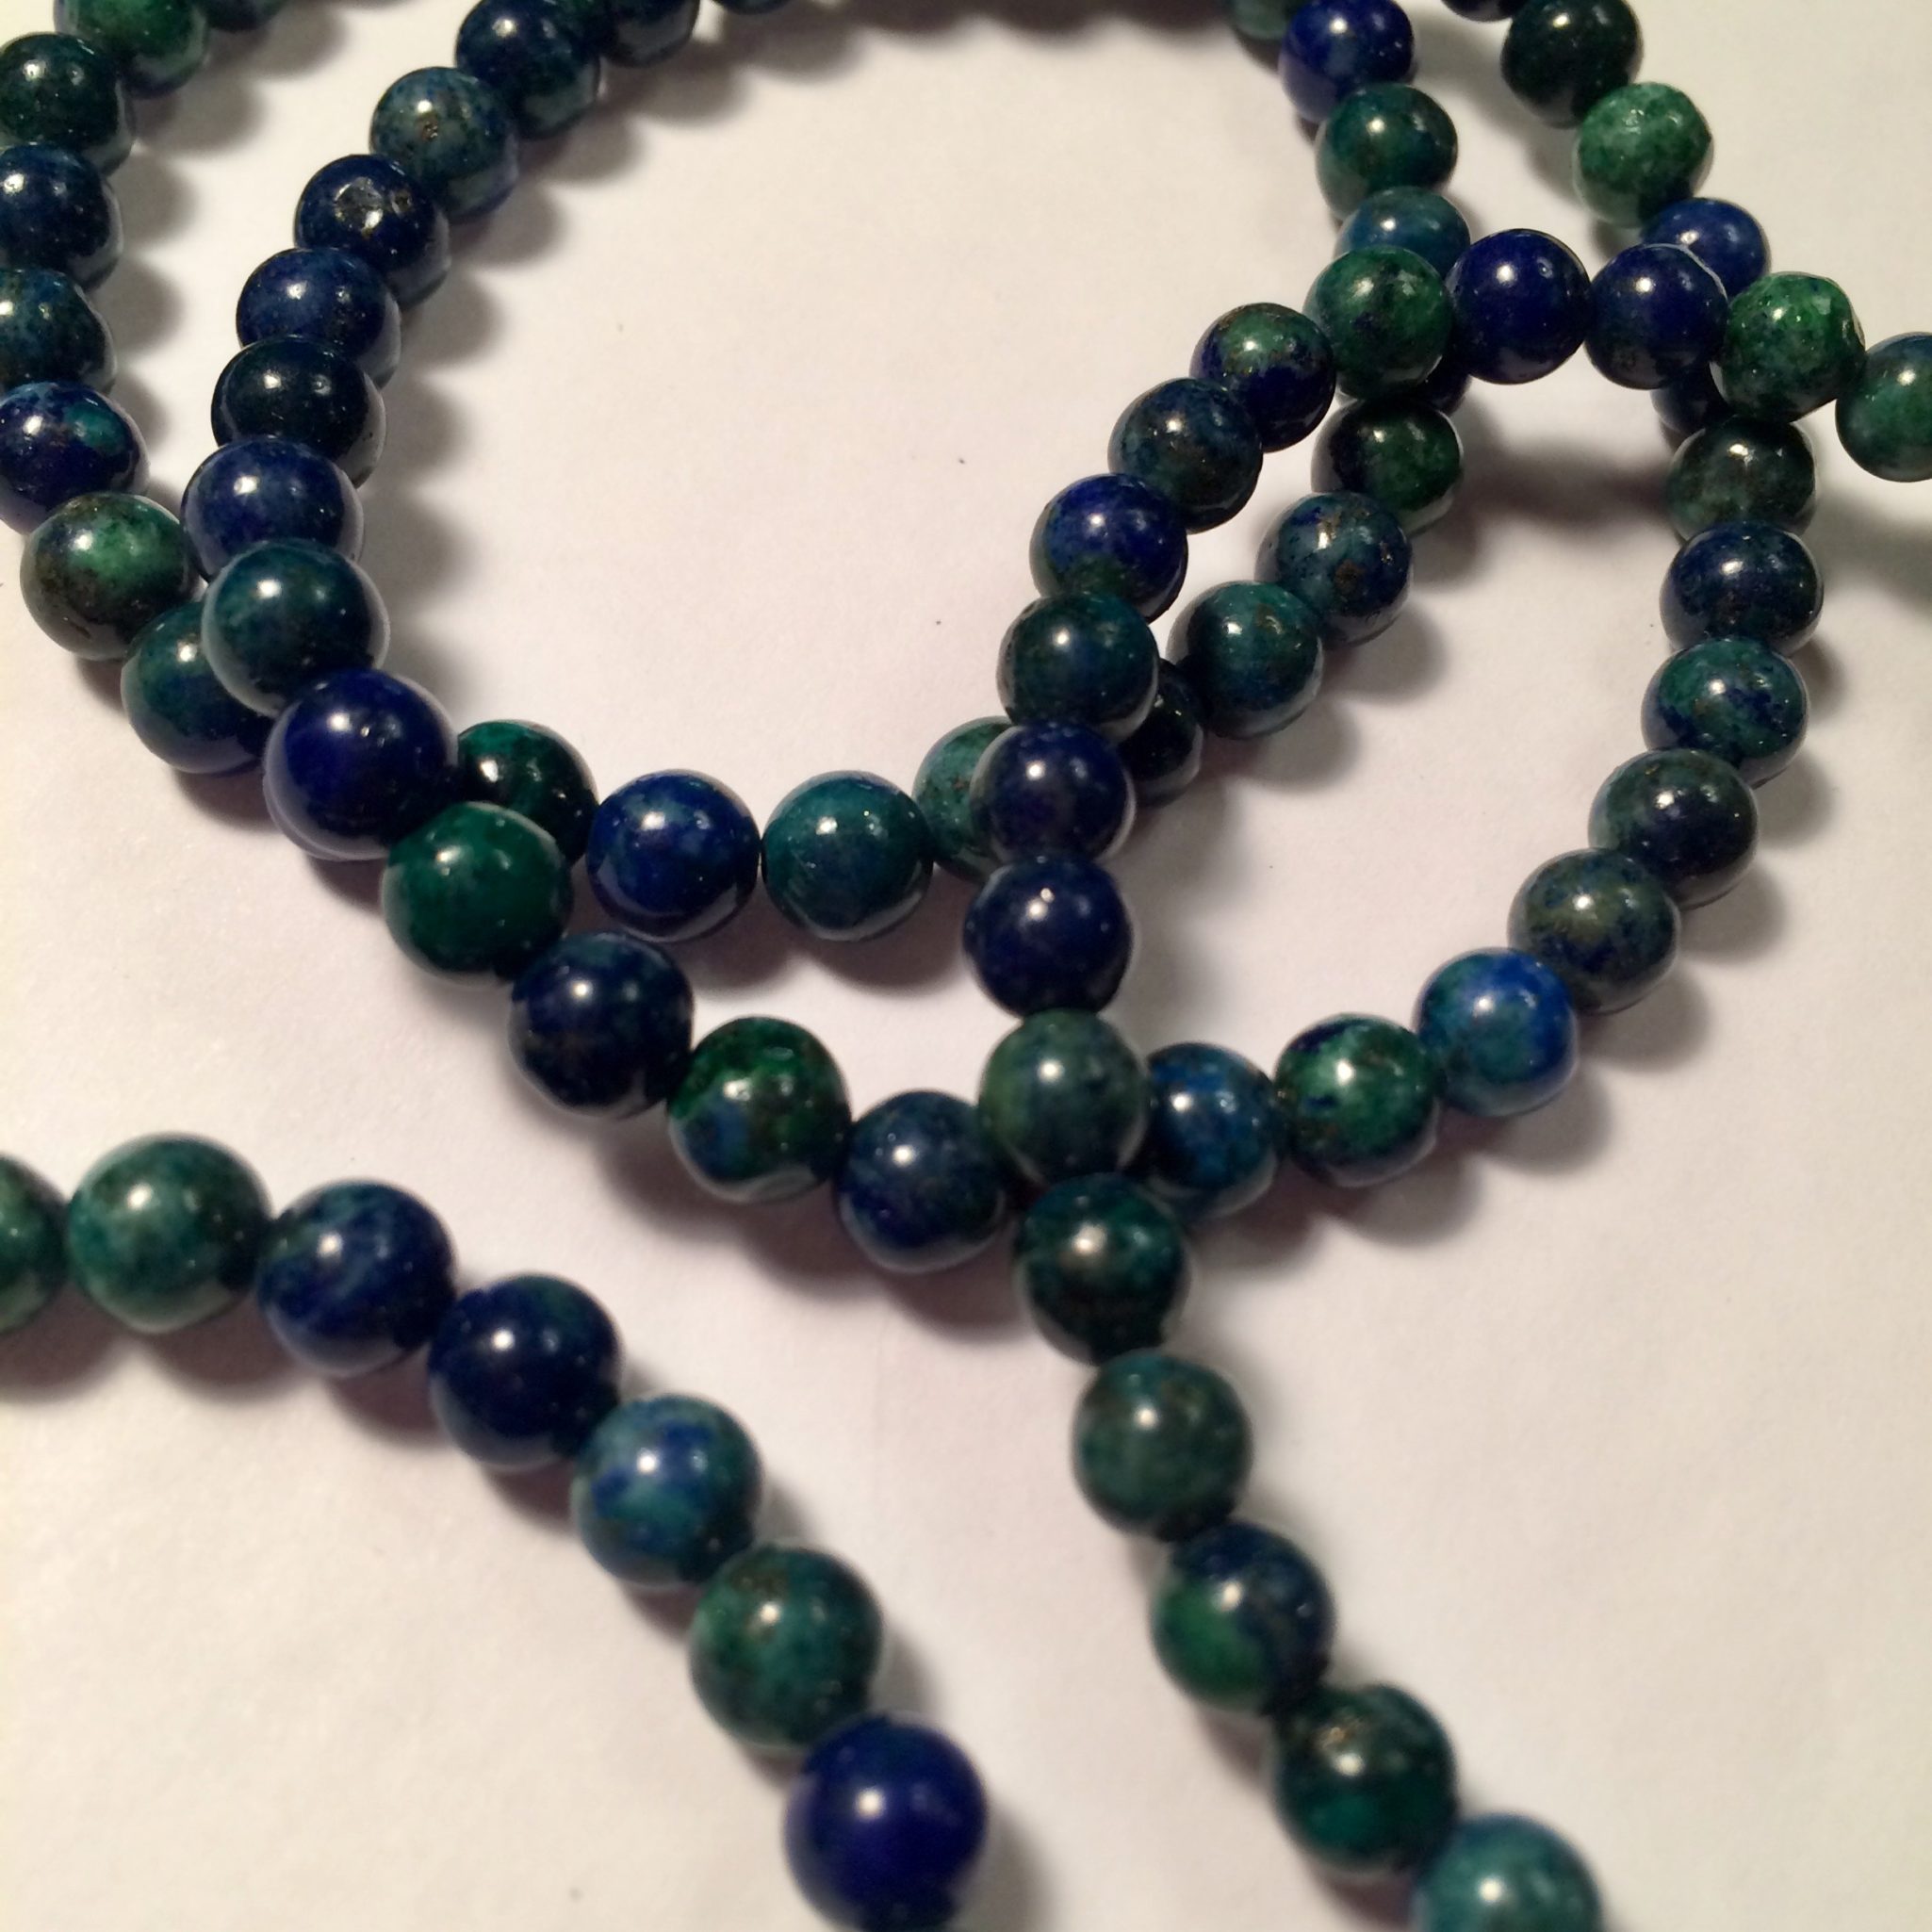 Esquire Men's Jewelry Reconstituted Azurite Malachite (8mm) Beaded Bracelet  in Sterling Silver, Created for Macy's - Macy's